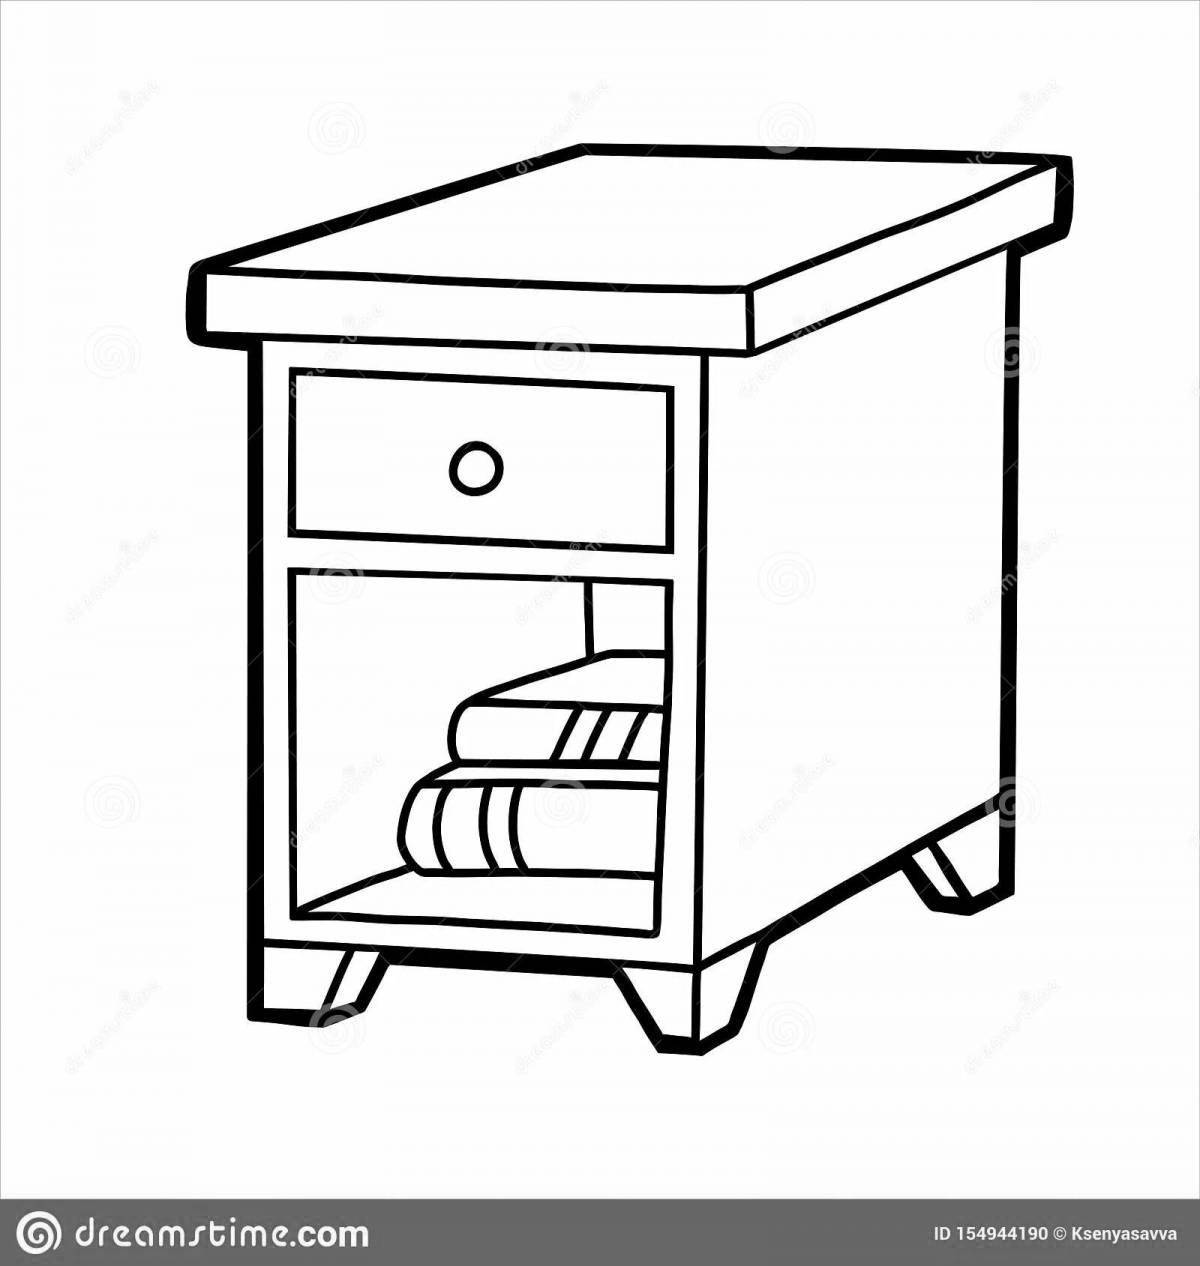 Coloring book shining bedside table